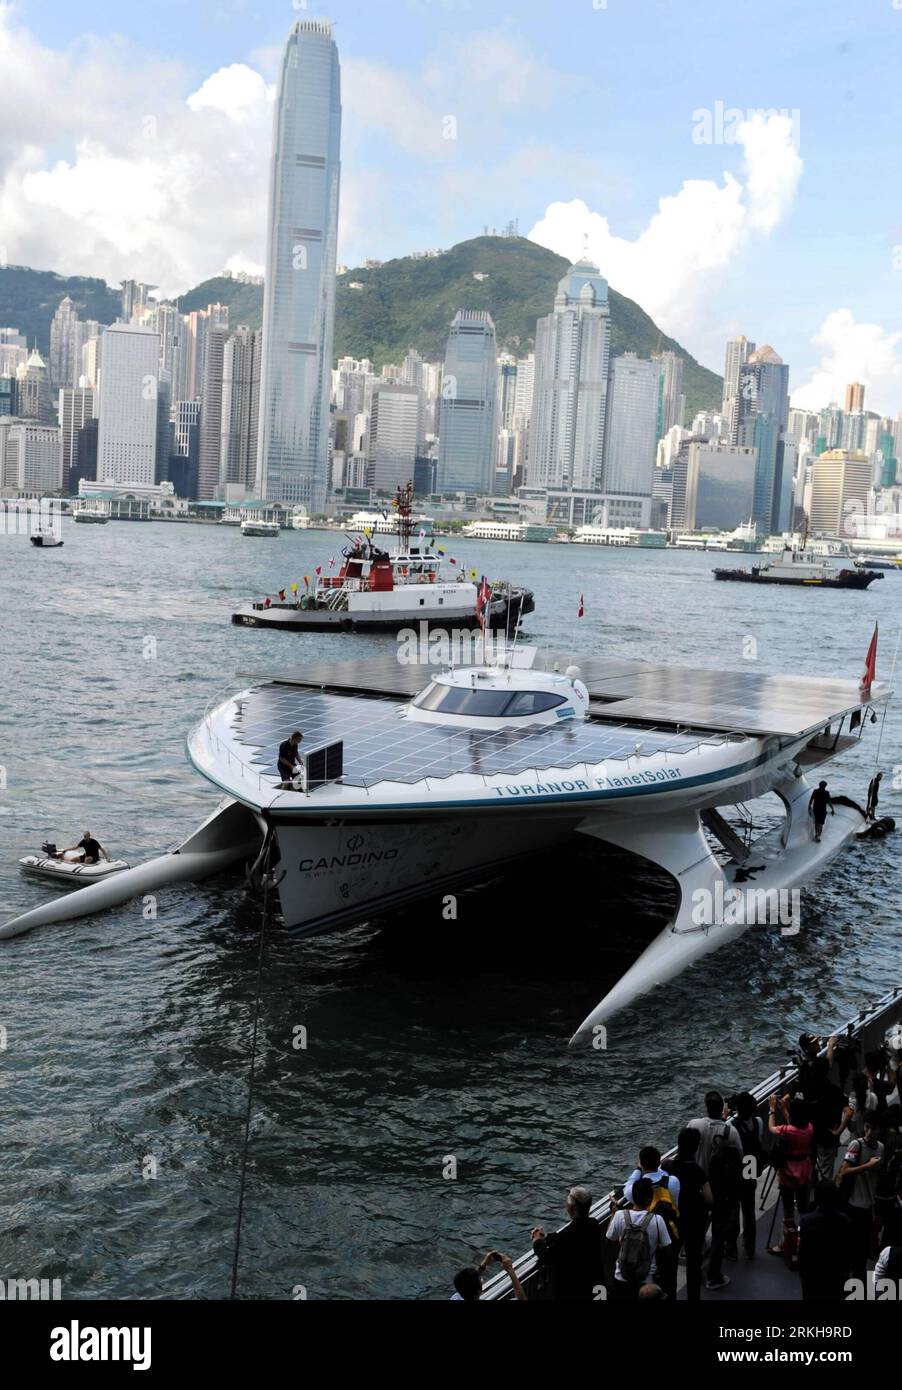 Bildnummer: 55765022  Datum: 15.08.2011  Copyright: imago/Xinhua (110815) -- HONG KONG, Aug. 15, 2011 (Xinhua) -- MS Turanor PlanetSolar, a solar powered boat, sails at the Victoria Harbor in Hong Kong, south China, Aug. 15, 2011. The solar powered catamaran, MS Turanor PlanetSolar, arrived at Hong Kong on Monday. PlanetSolar, a 31-meter-long ship with a total of 500 square meters solar battery, will anchor in Hong Kong from Aug. 15 to Aug. 23, as a waypoint during its voyage around the world. (Xinhua/Song Zhenping) (xzj) CHINA-HONG KONG-SOLAR CATAMARAN-MS TURANOR PLANET SOLAR-ARRIVAL (CN) PUB Stock Photo